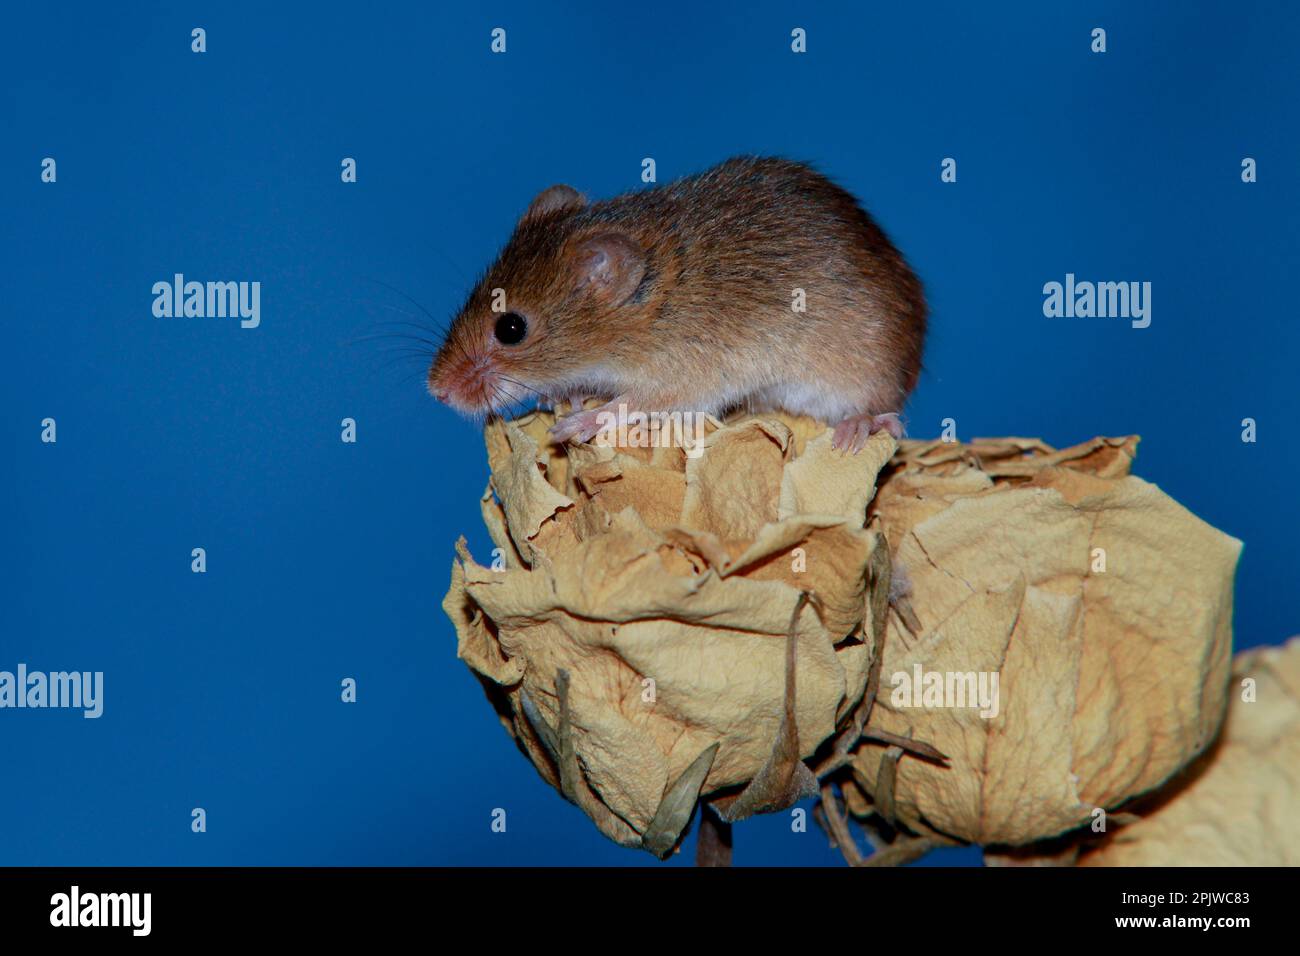 Harvest mouse on dried plant Stock Photo